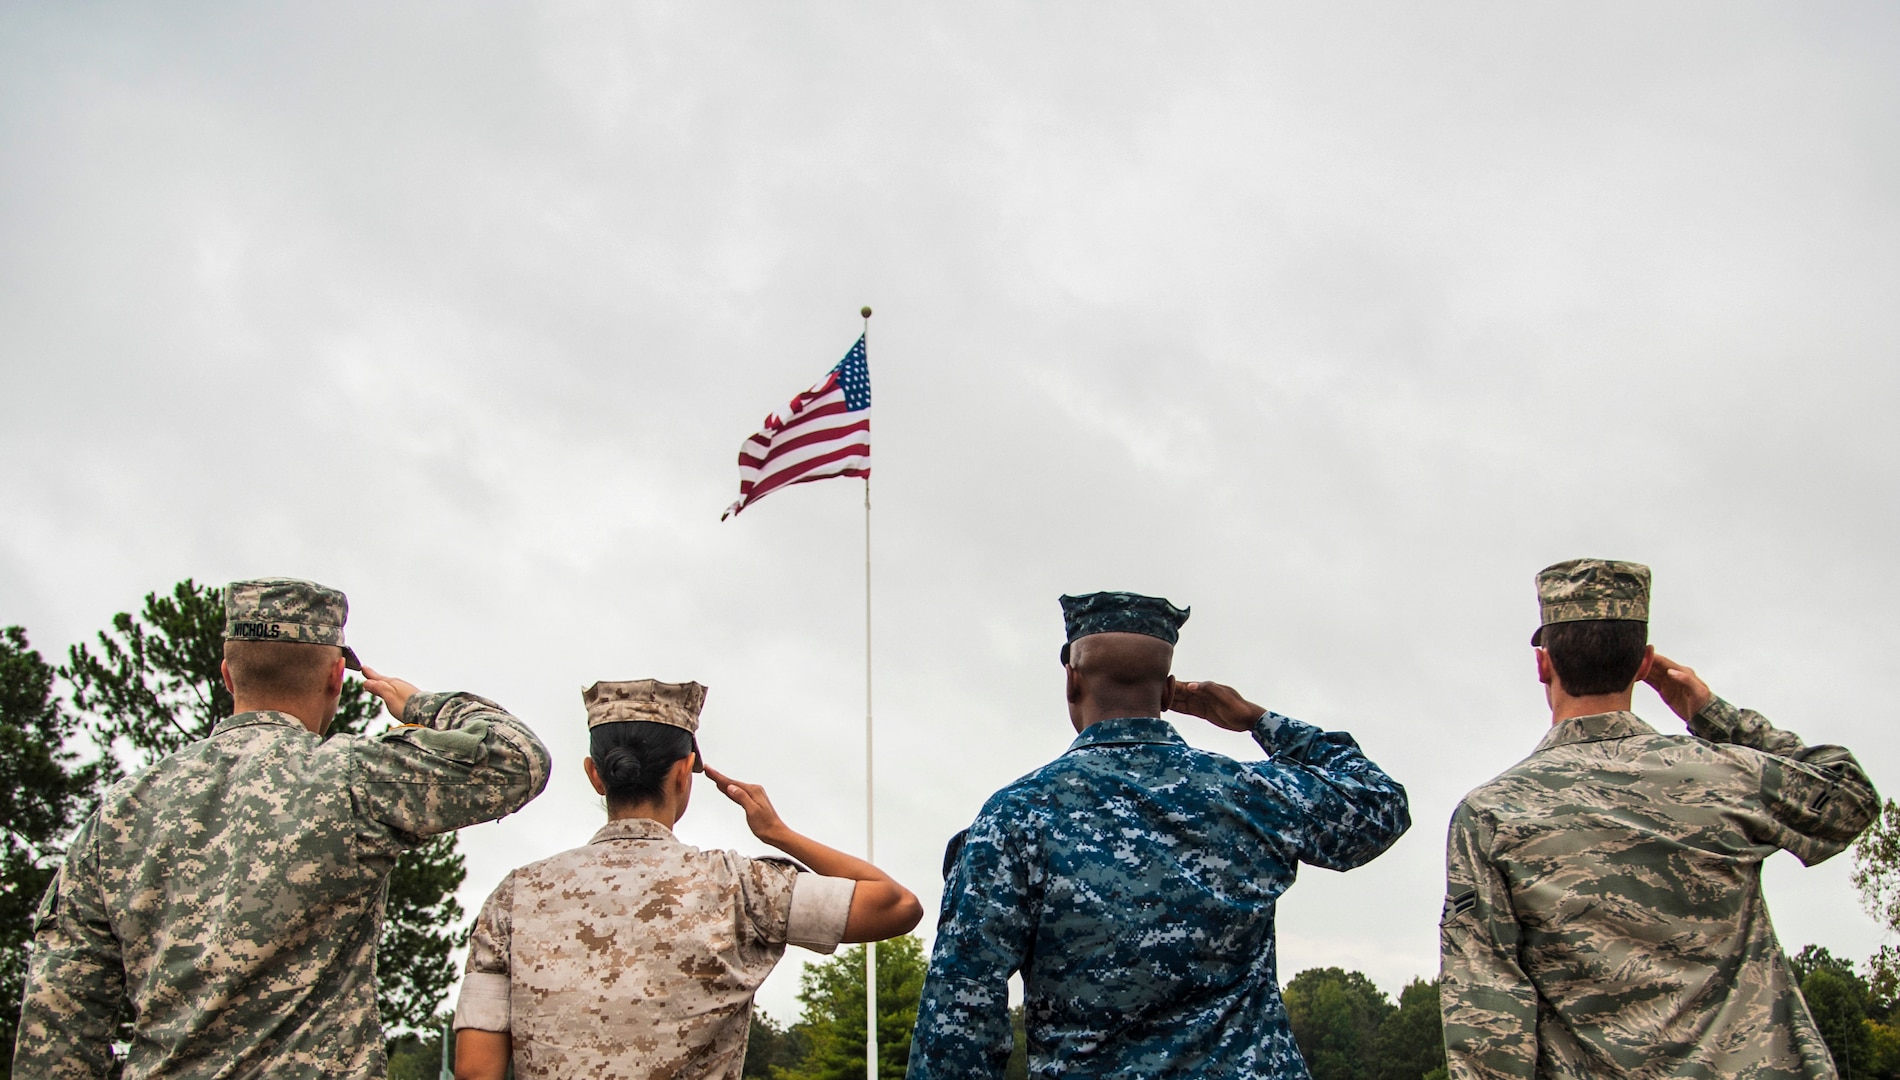 Service members salute the American flag during a retreat ceremony. The four military members represented each branch of the U.S. military and assembled to show solidarity.